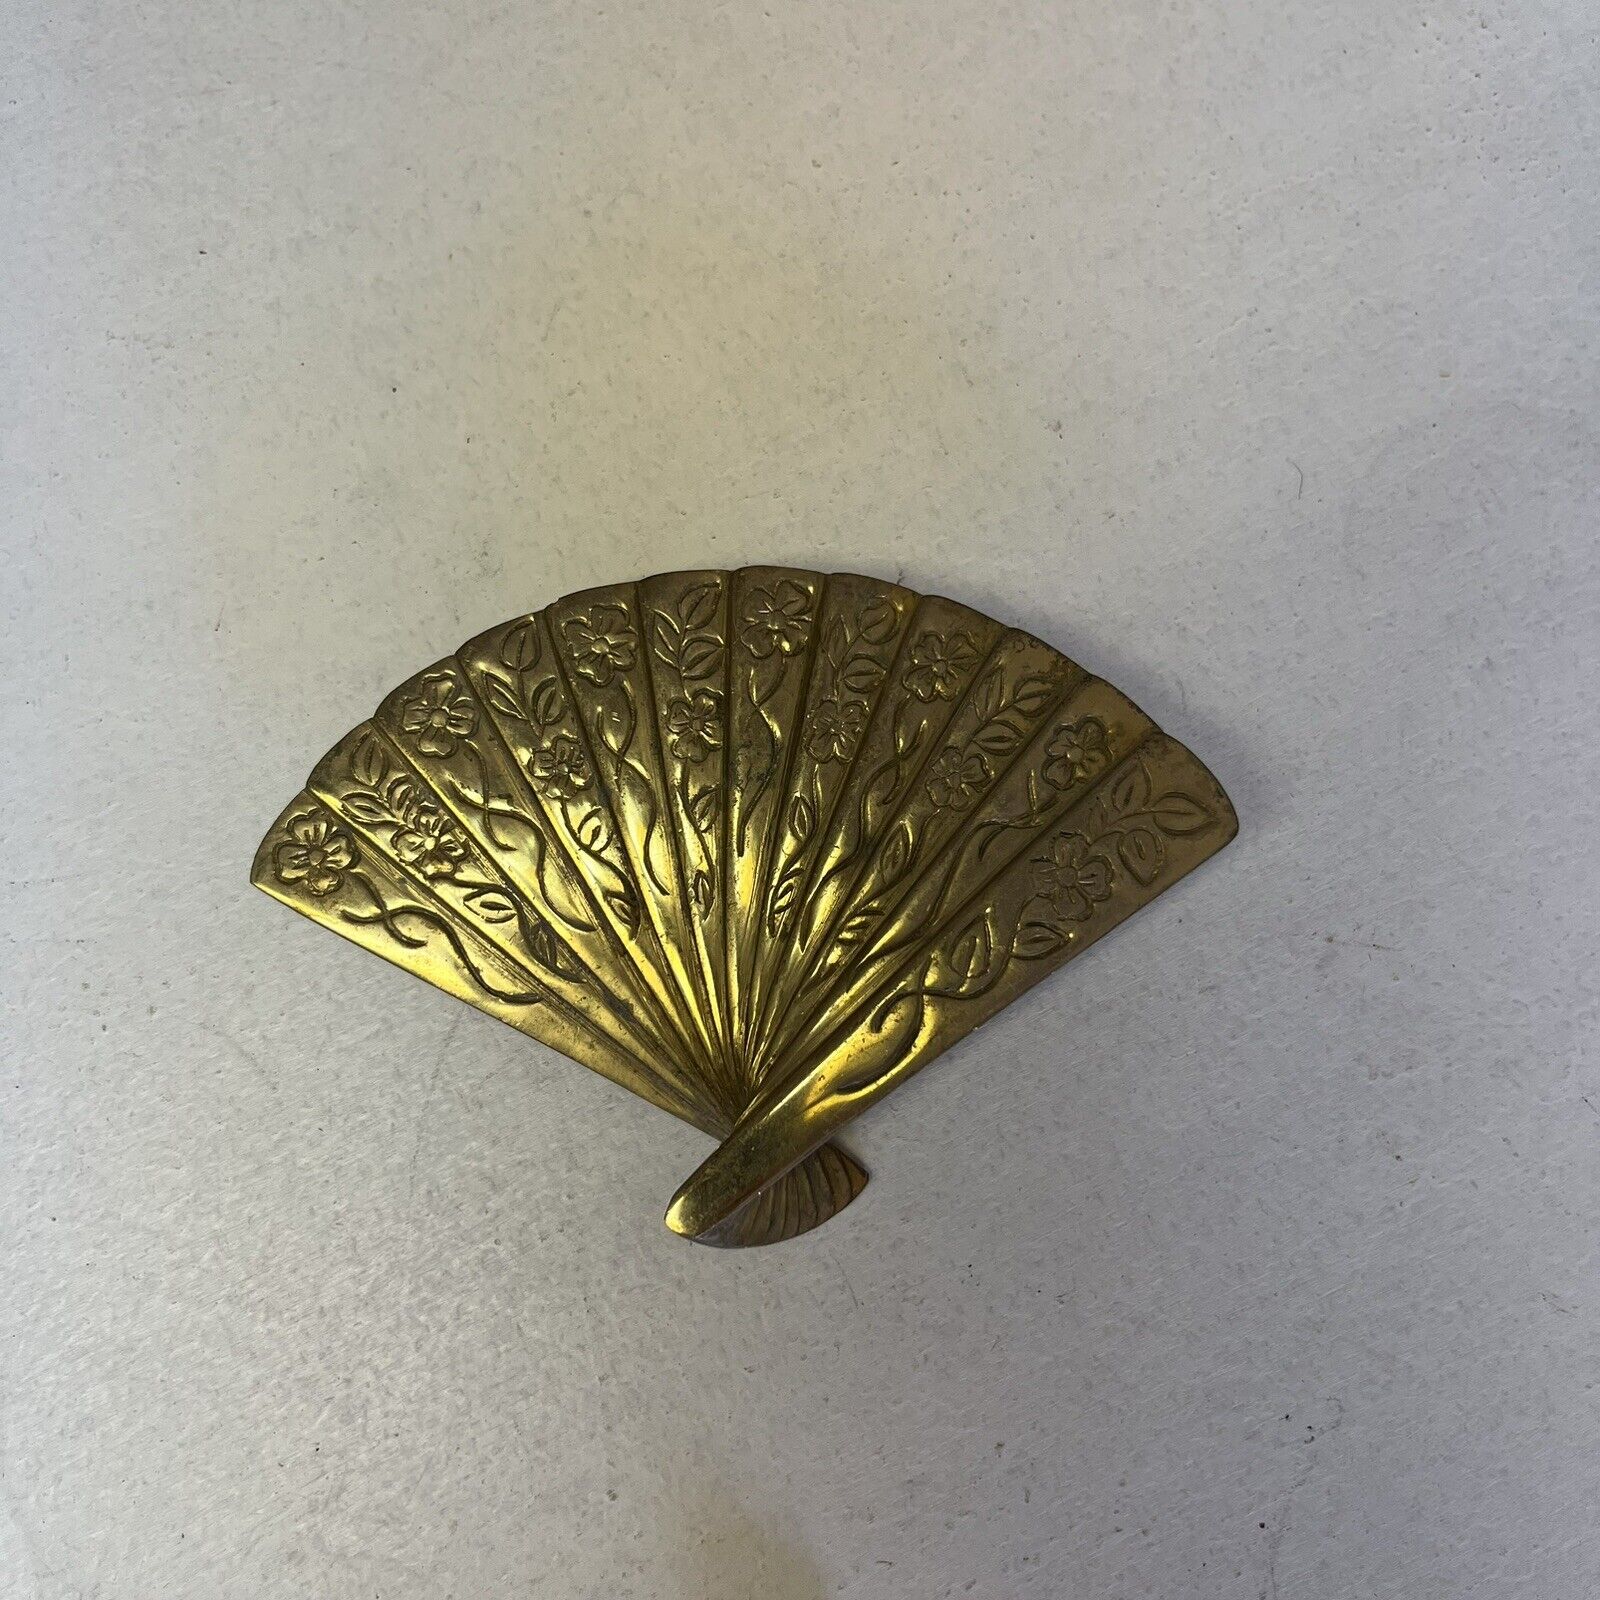 Vintage Decorative Brass Adian Fan Made In India